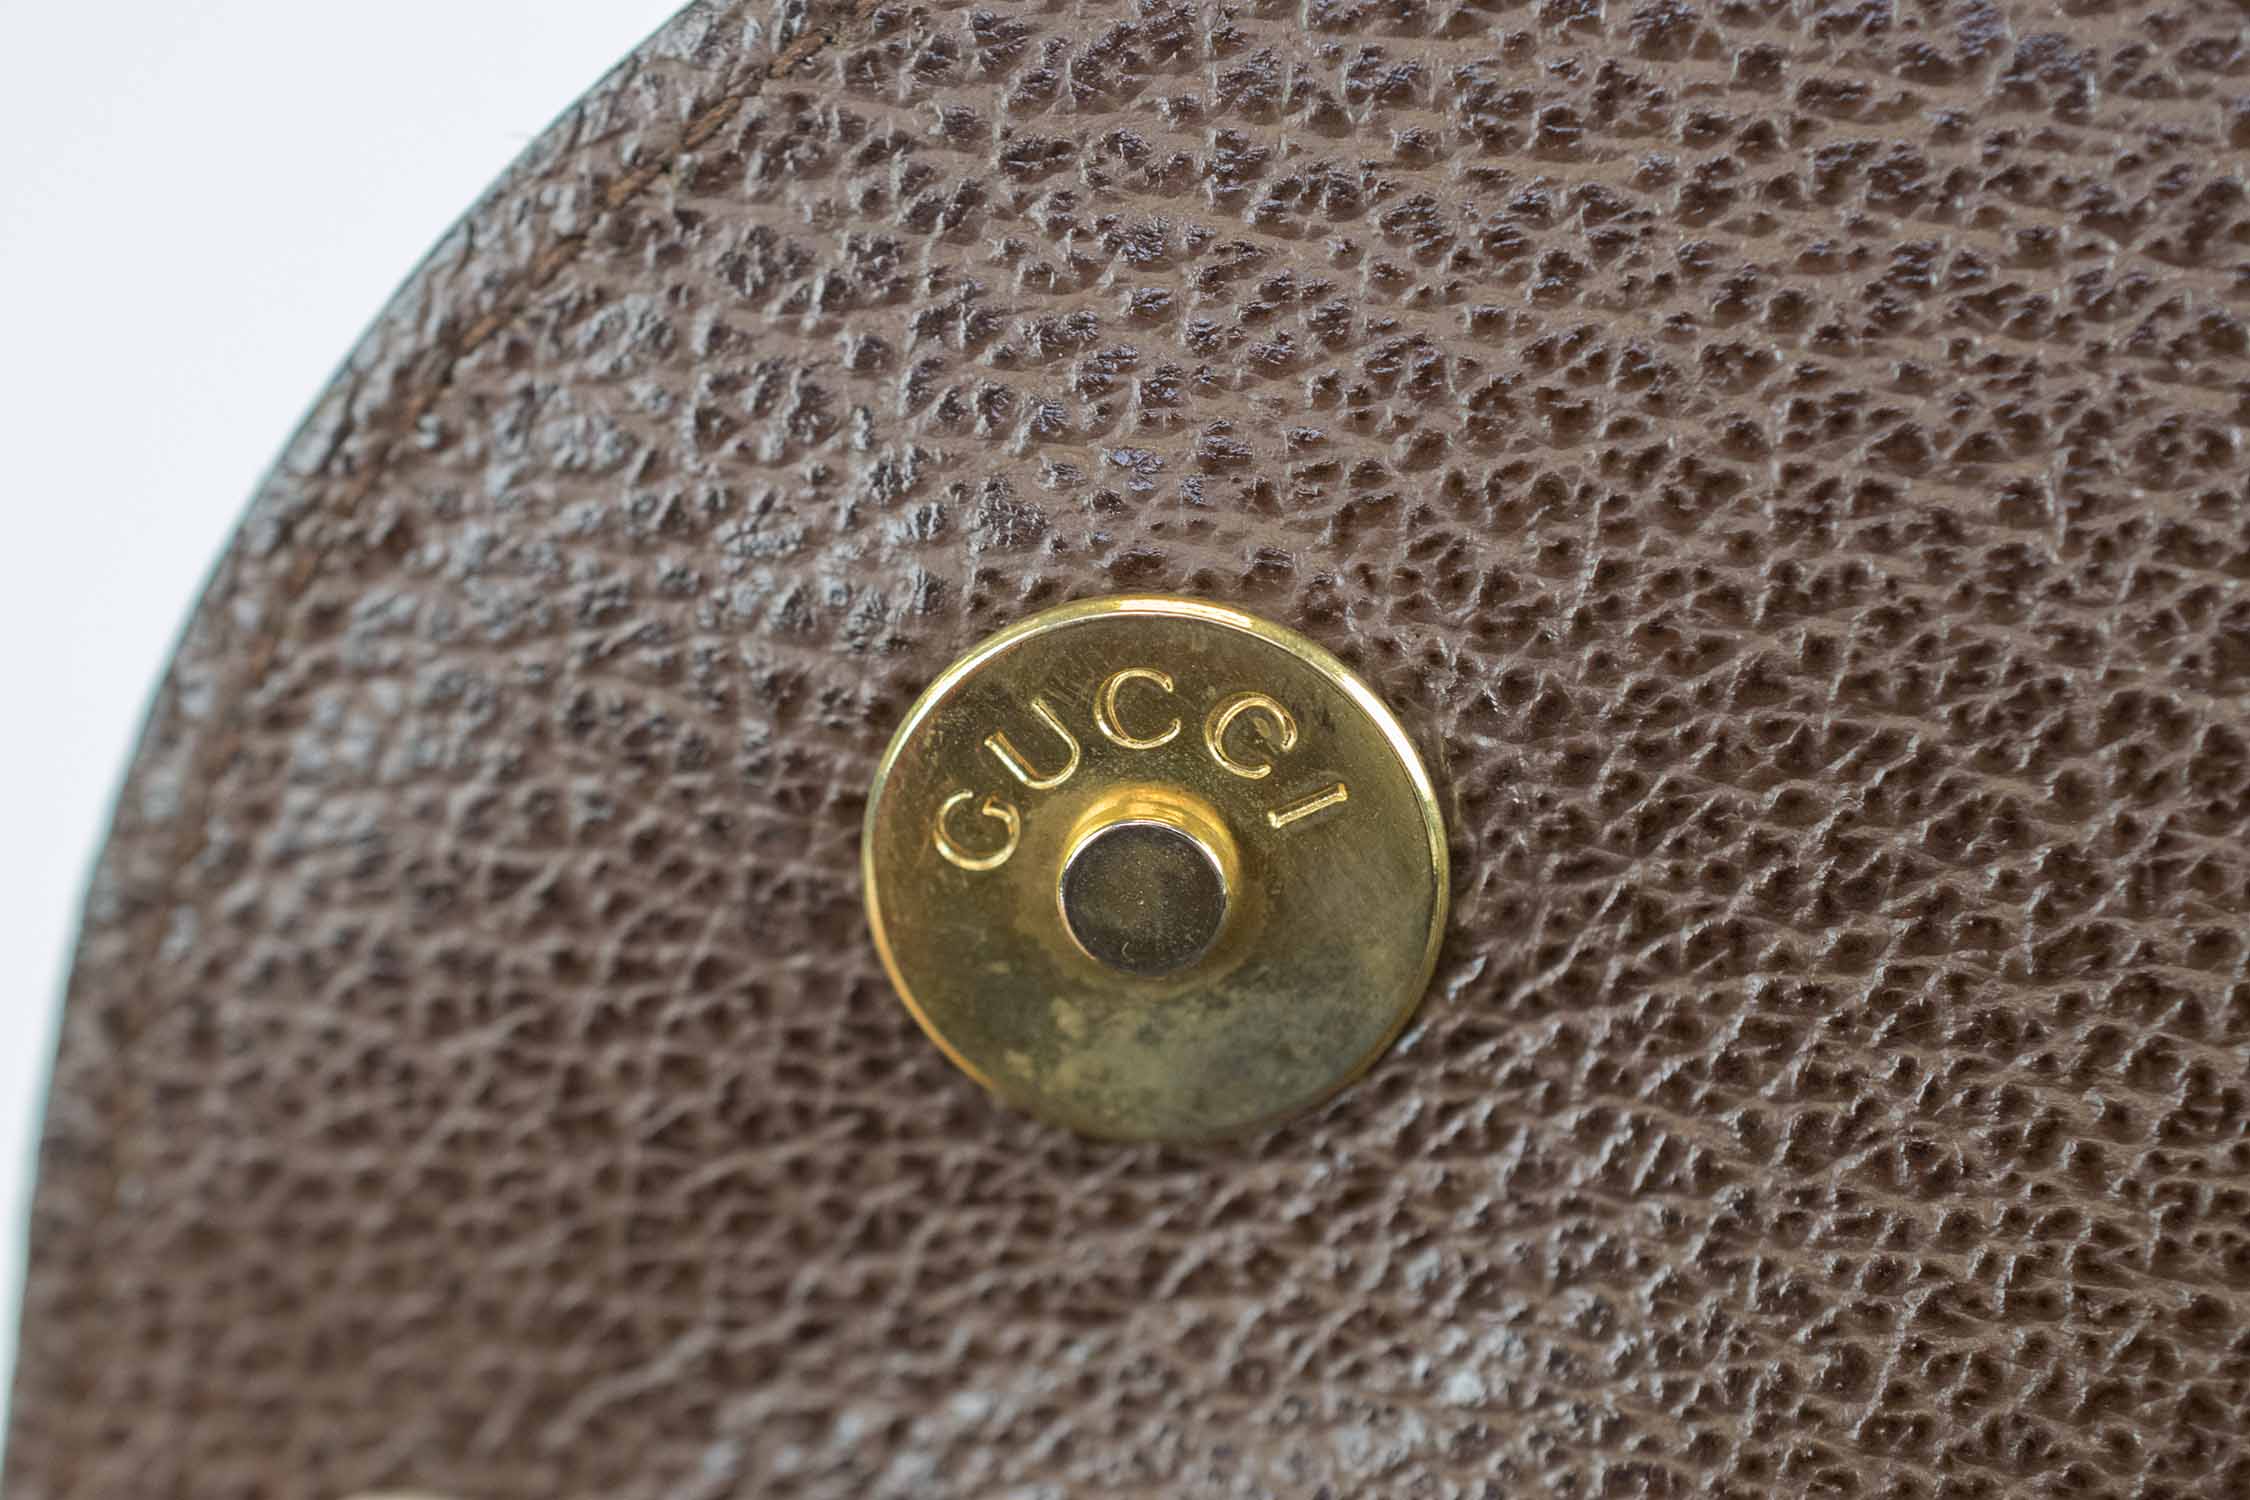 GUCCI VINTAGE SADDLE BAGS, with equestrian stirrup charm, one brown leather  and suede 30cm x 23cm H x 12cm, the other black leather 20cm x 18cm H x 6cm  both with adjustable